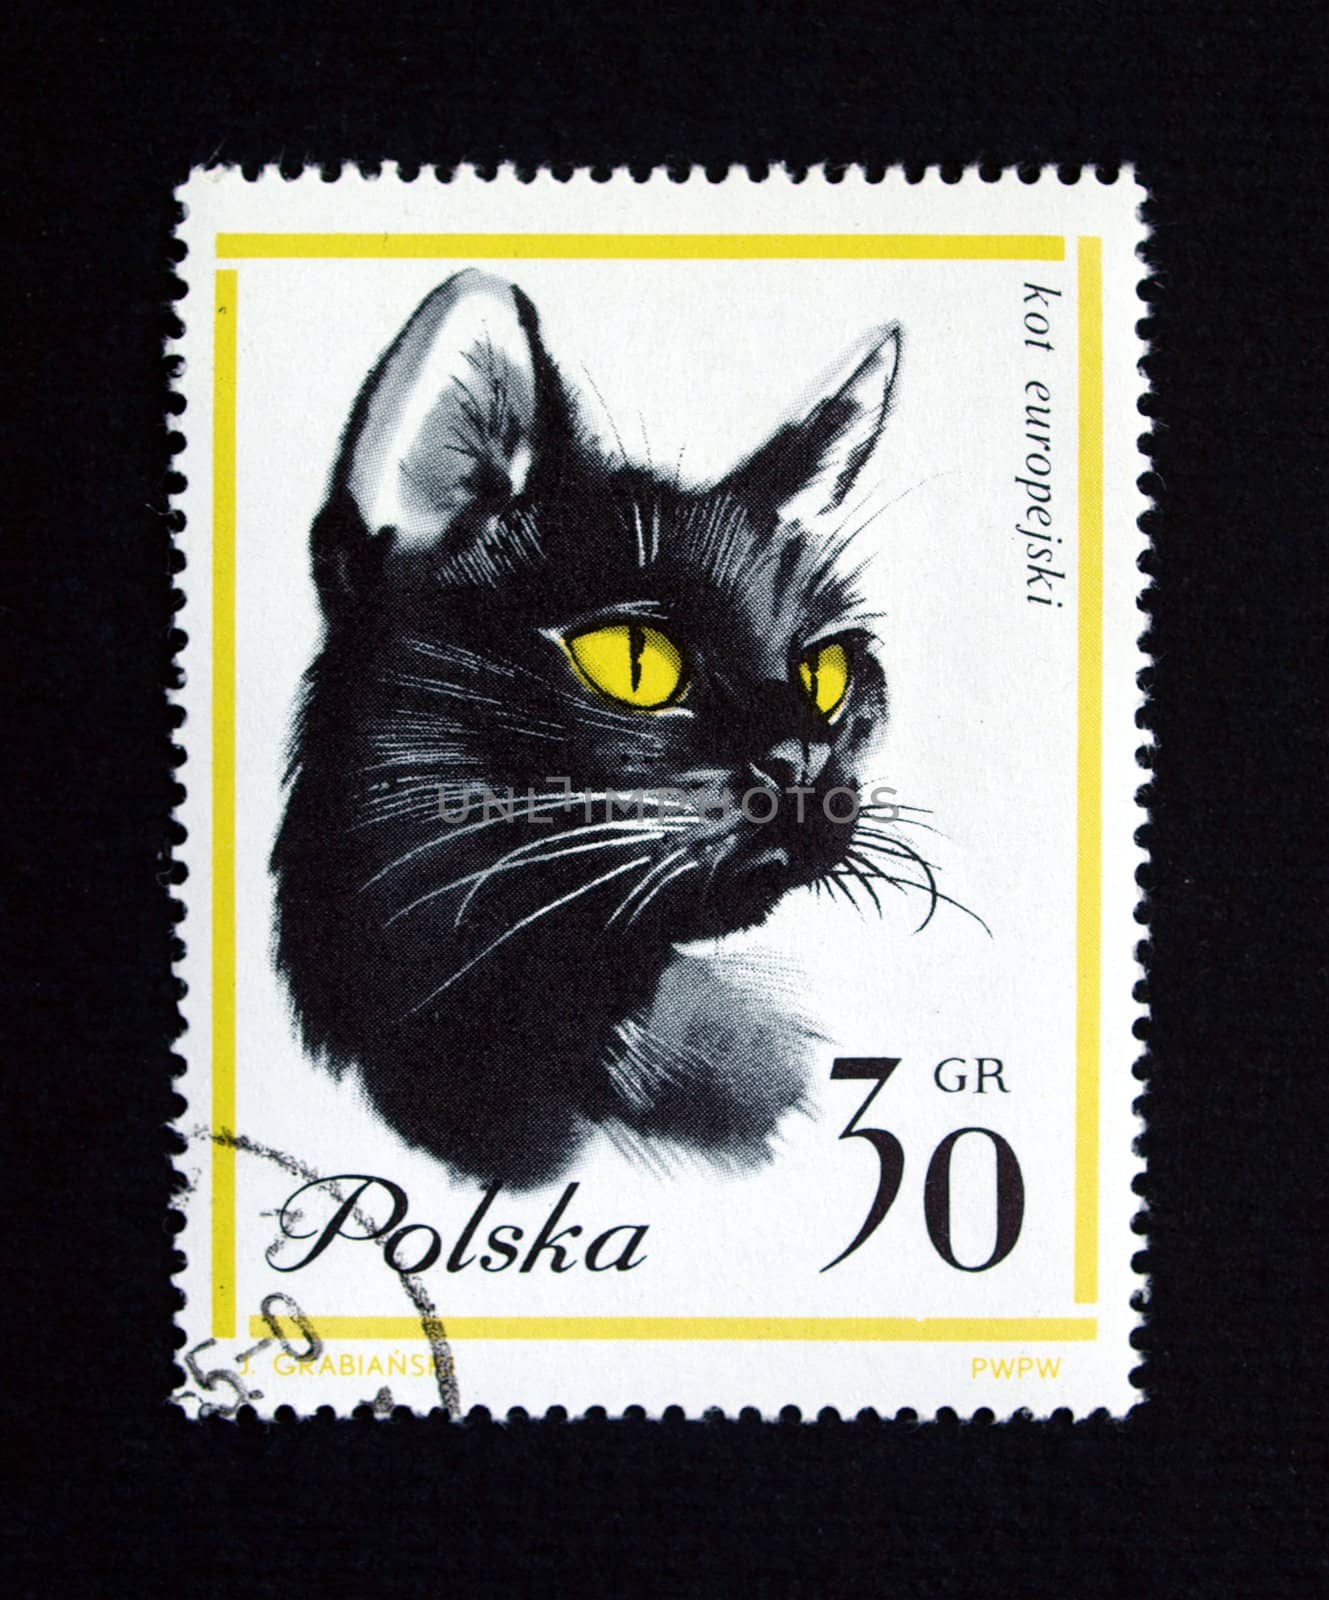 Stamp with cat from Polonia